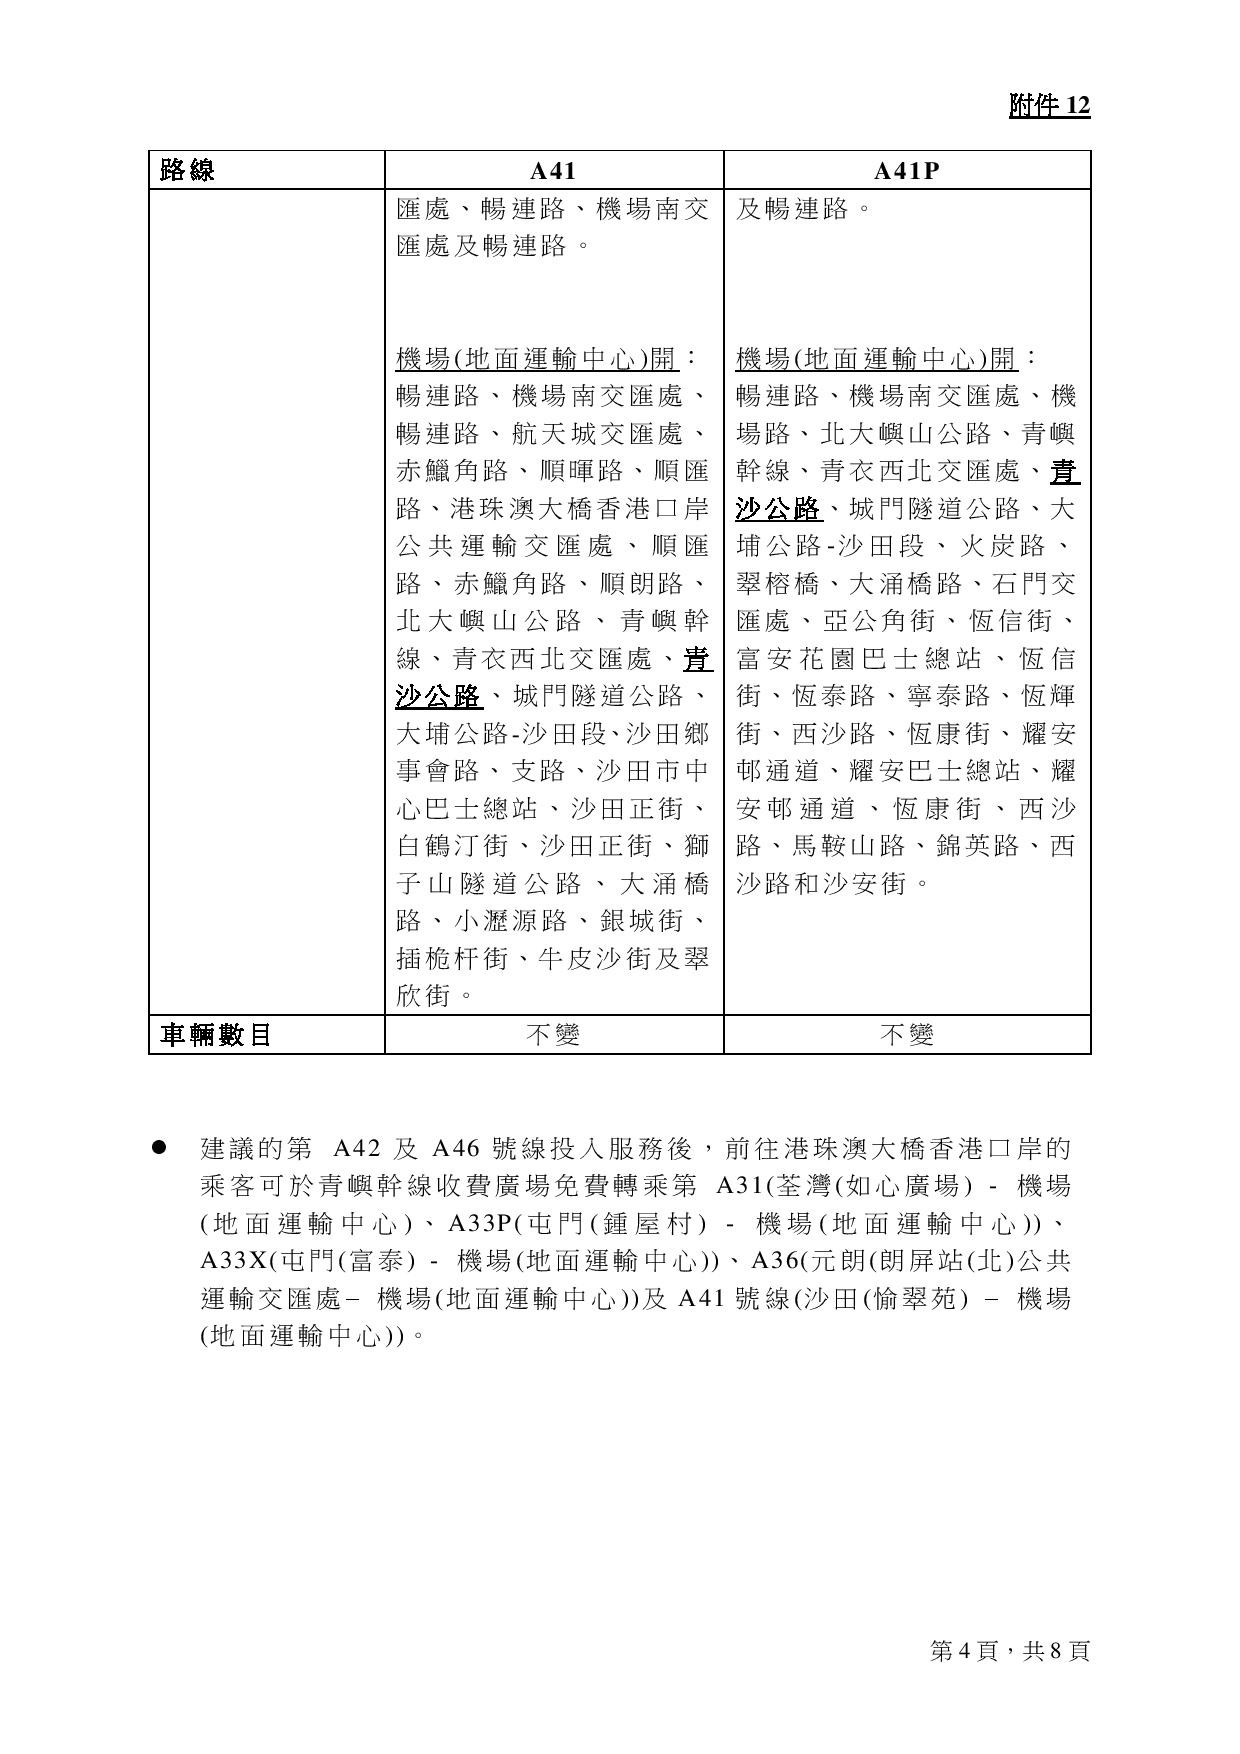 Document-page-051.jpg